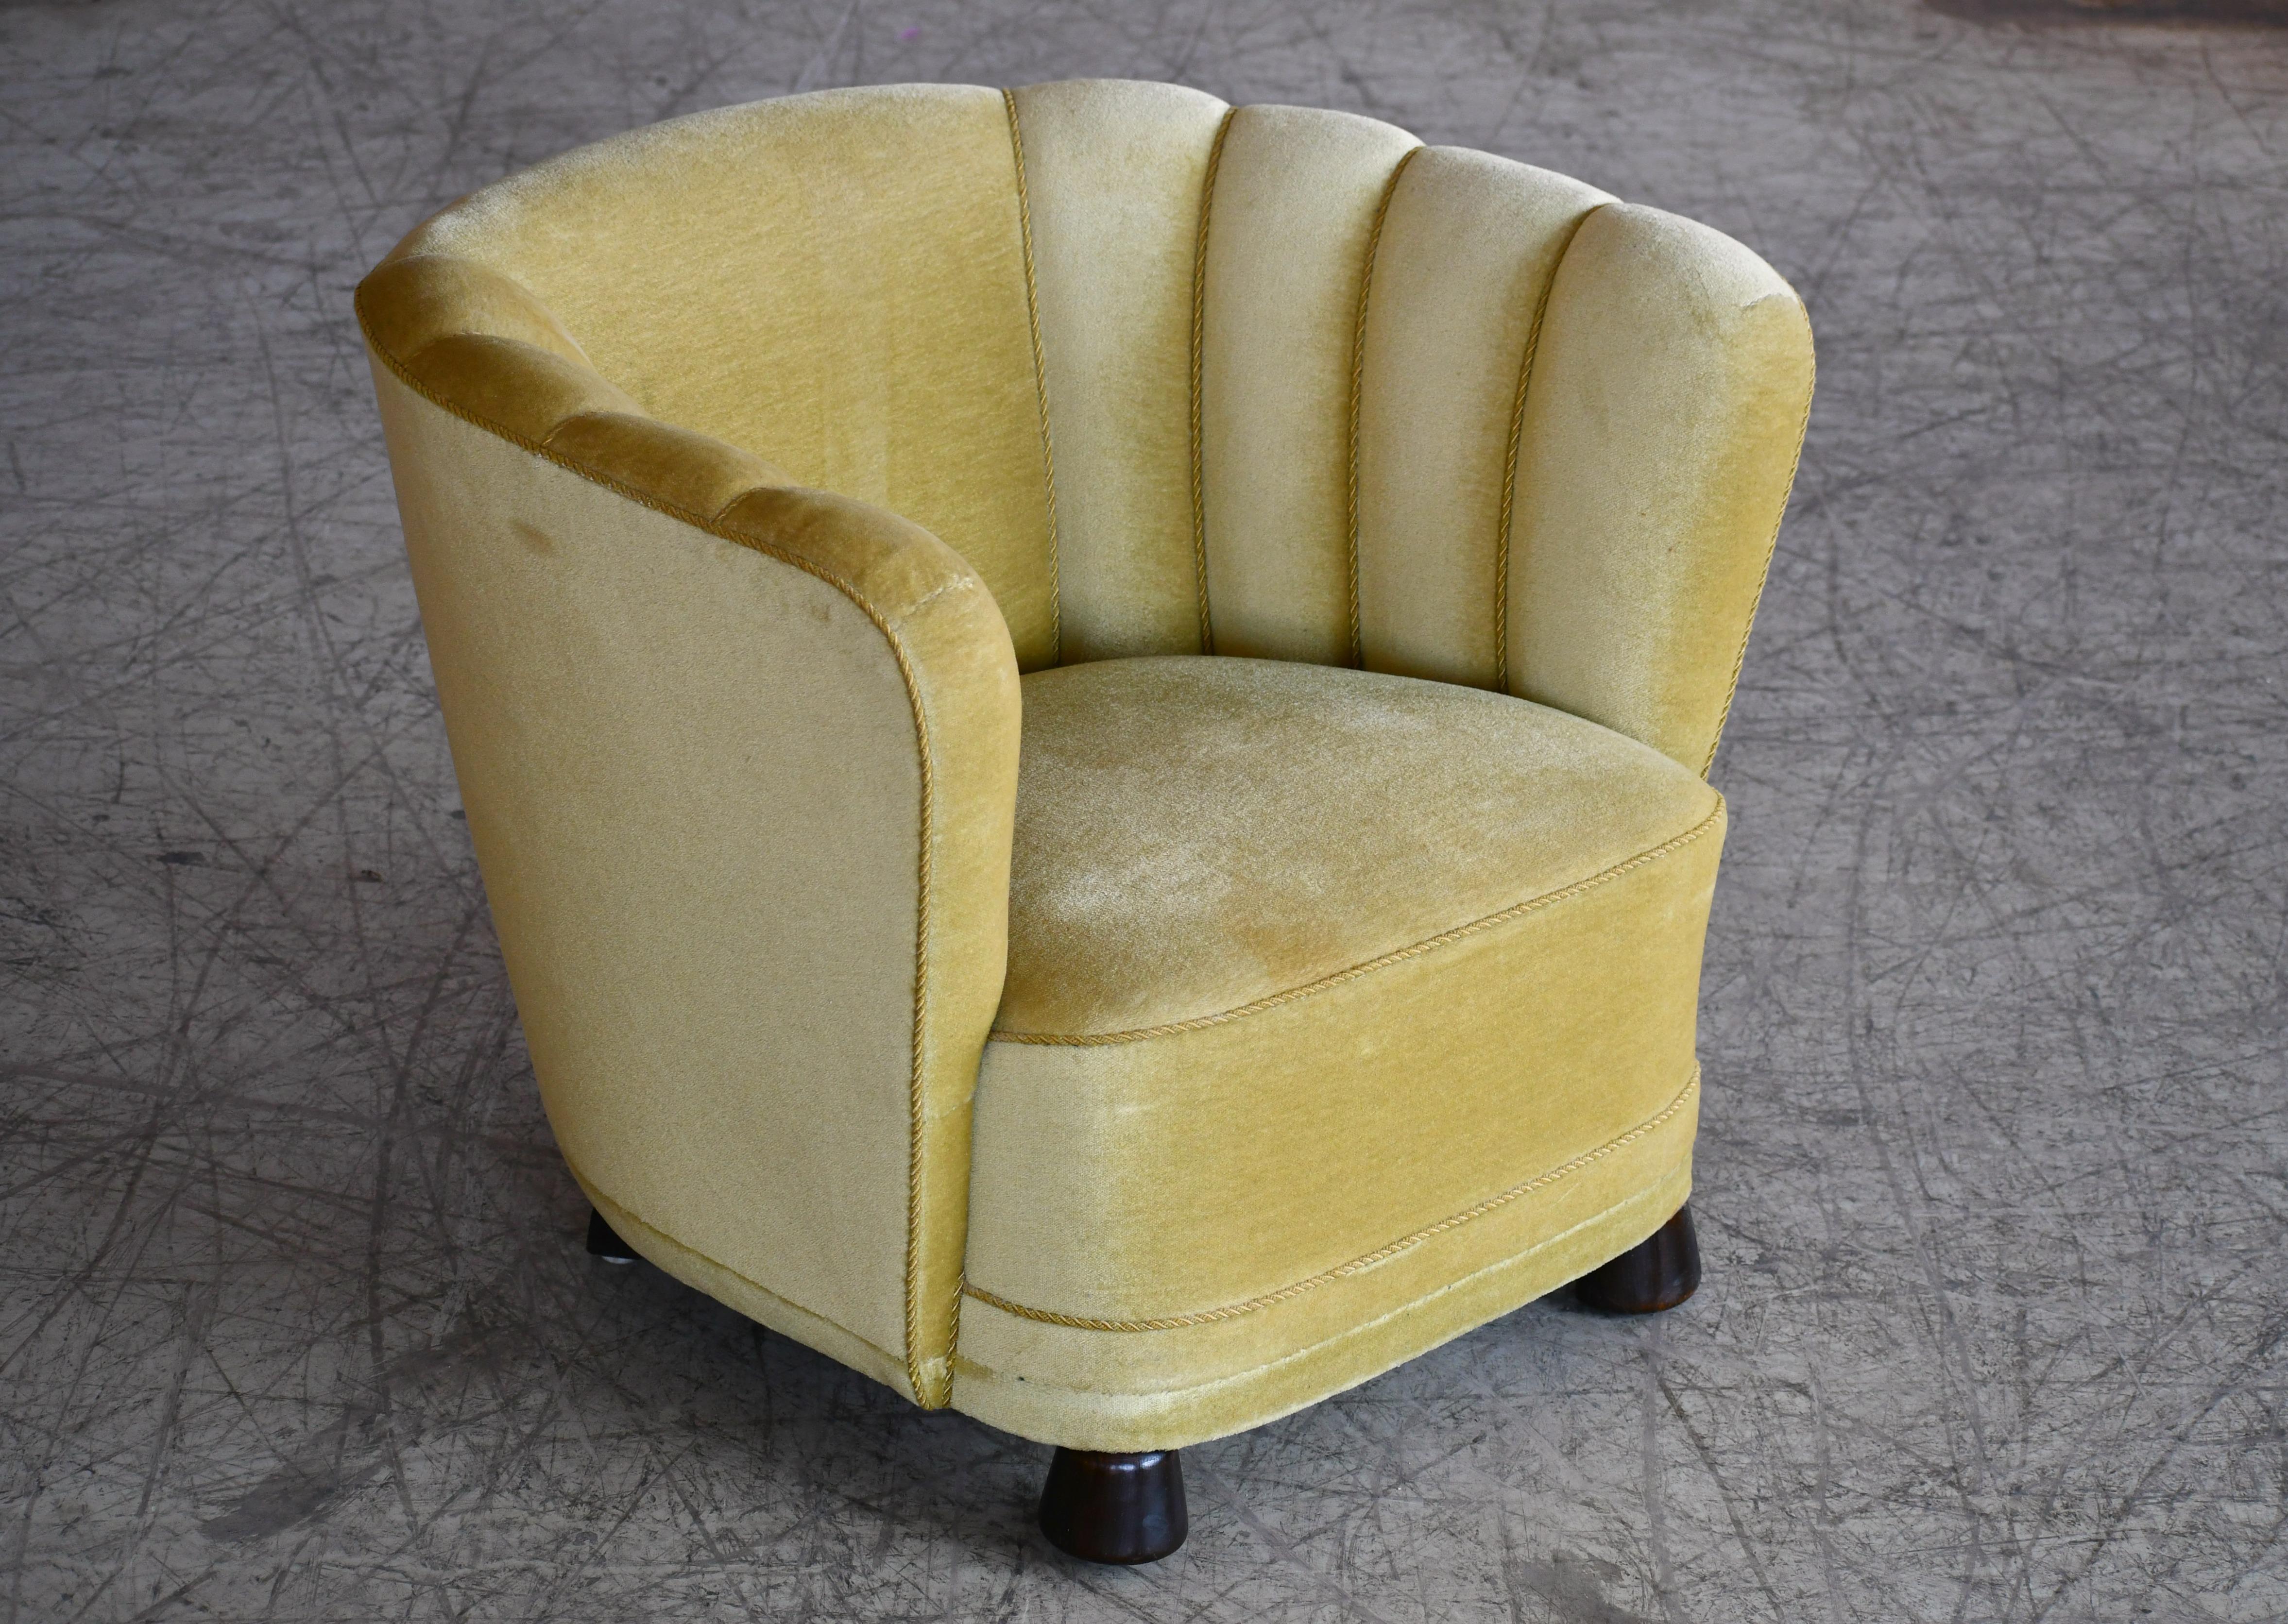 This supercool 1940s Danish curved club chair is actually a match to the Danish curved or banana form sofas made in the 1930s-1940s. The sofas and chairs were very popular coming out of the 1930s and into the early 1940s and inspired by the Art Deco